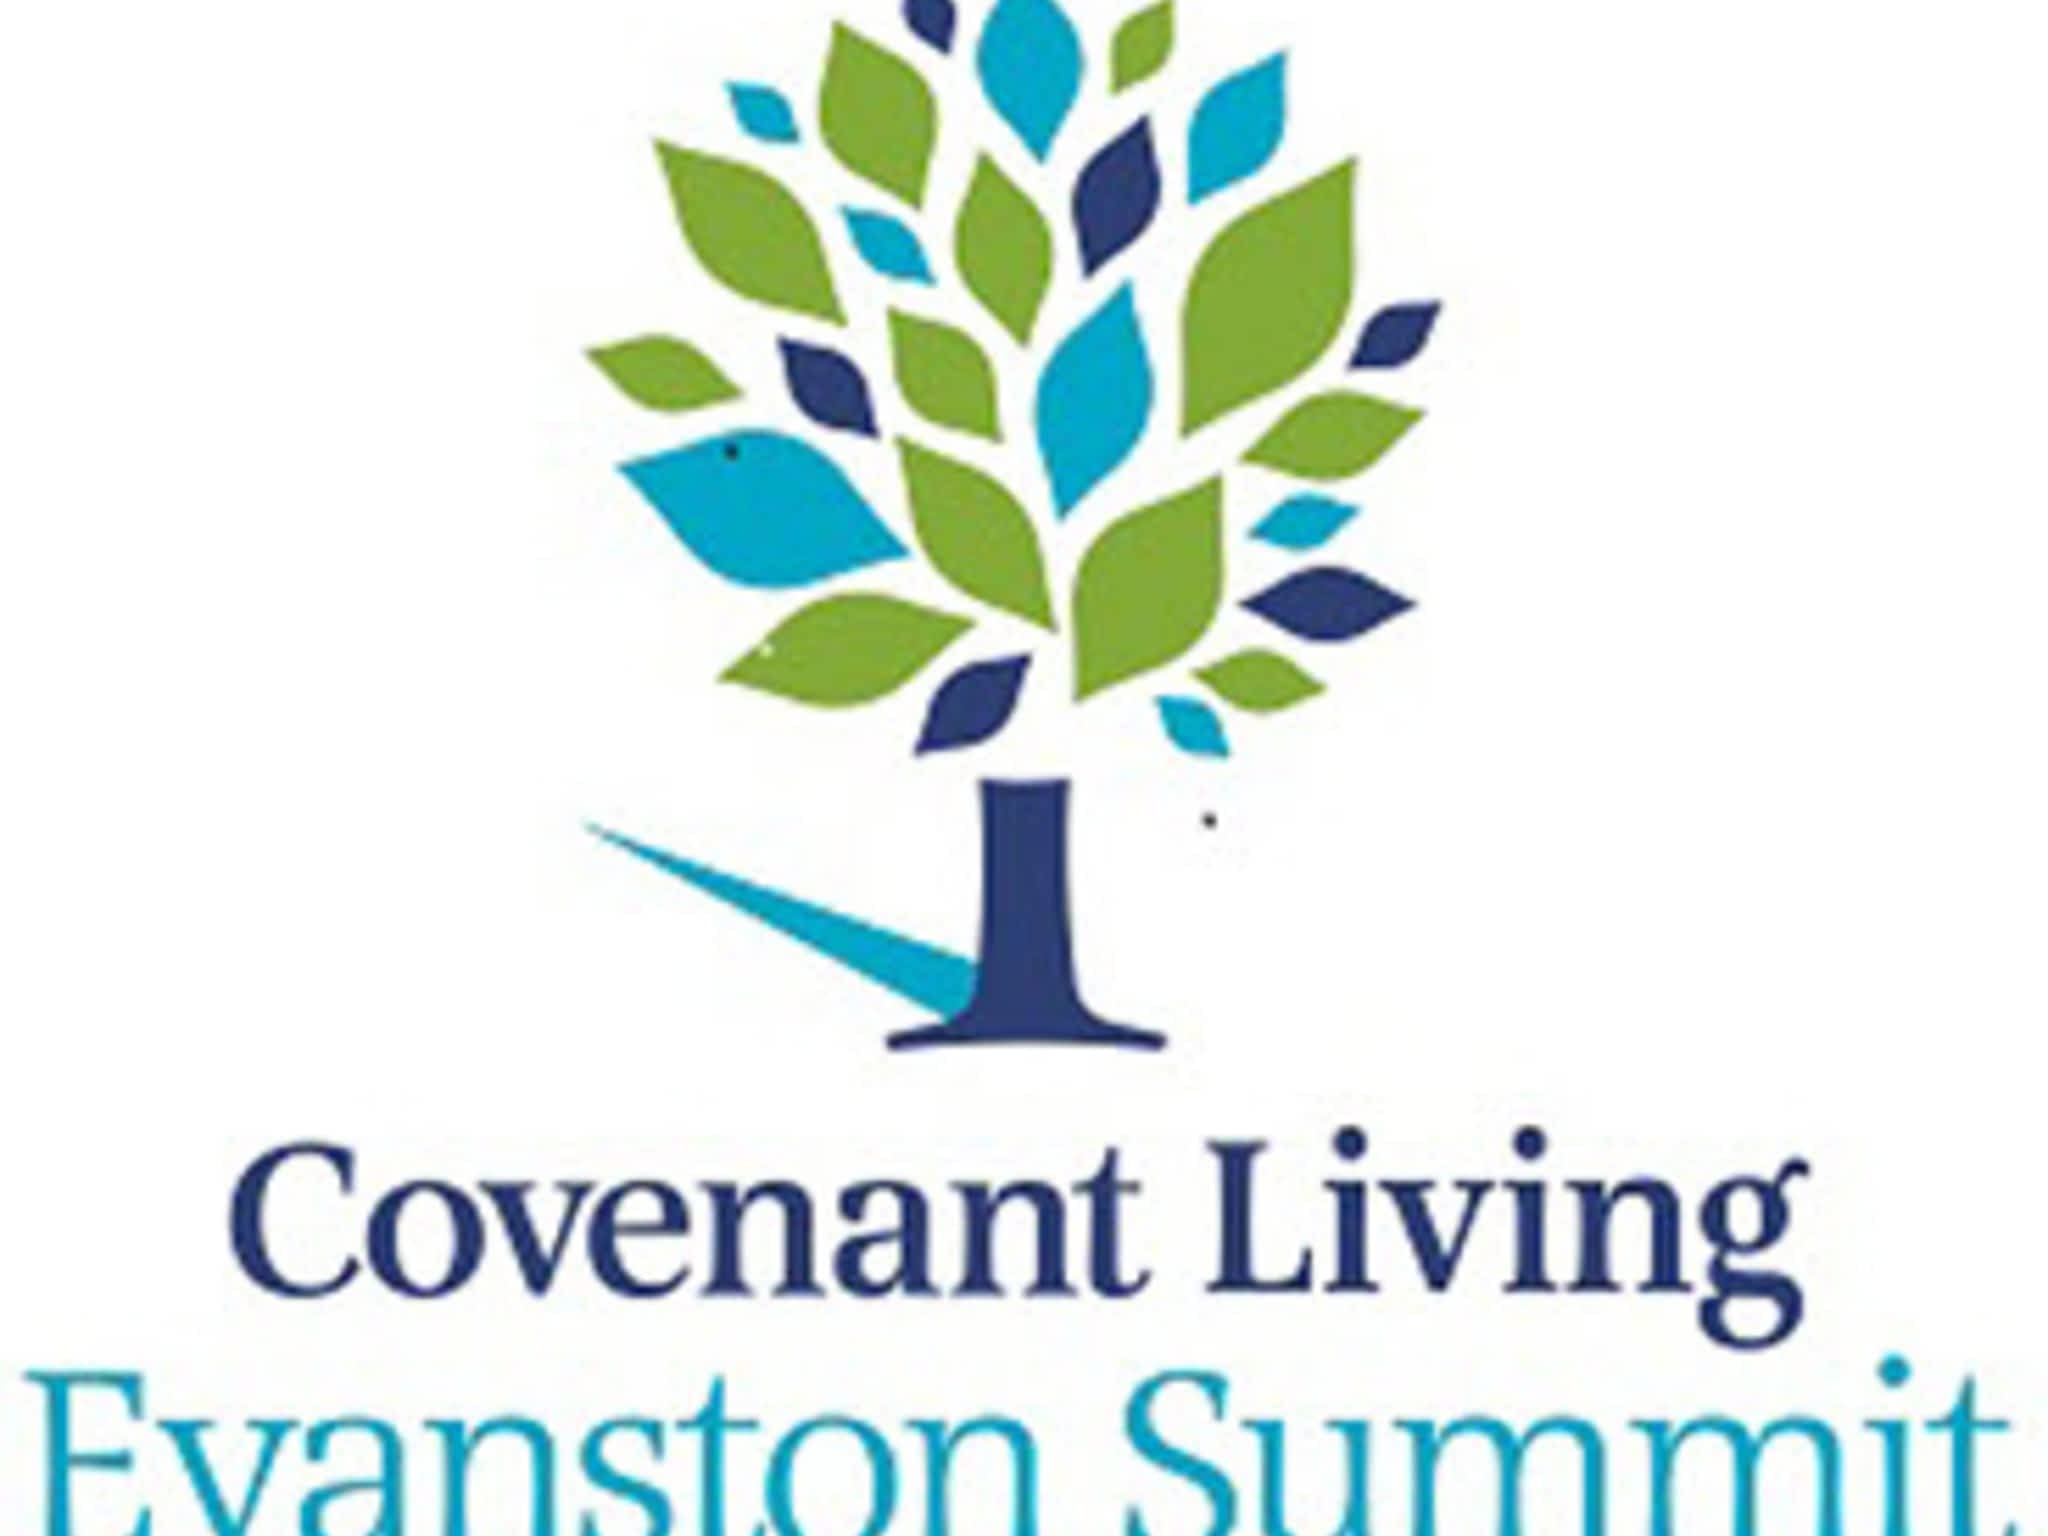 photo Evanston Summit by Covenant Living